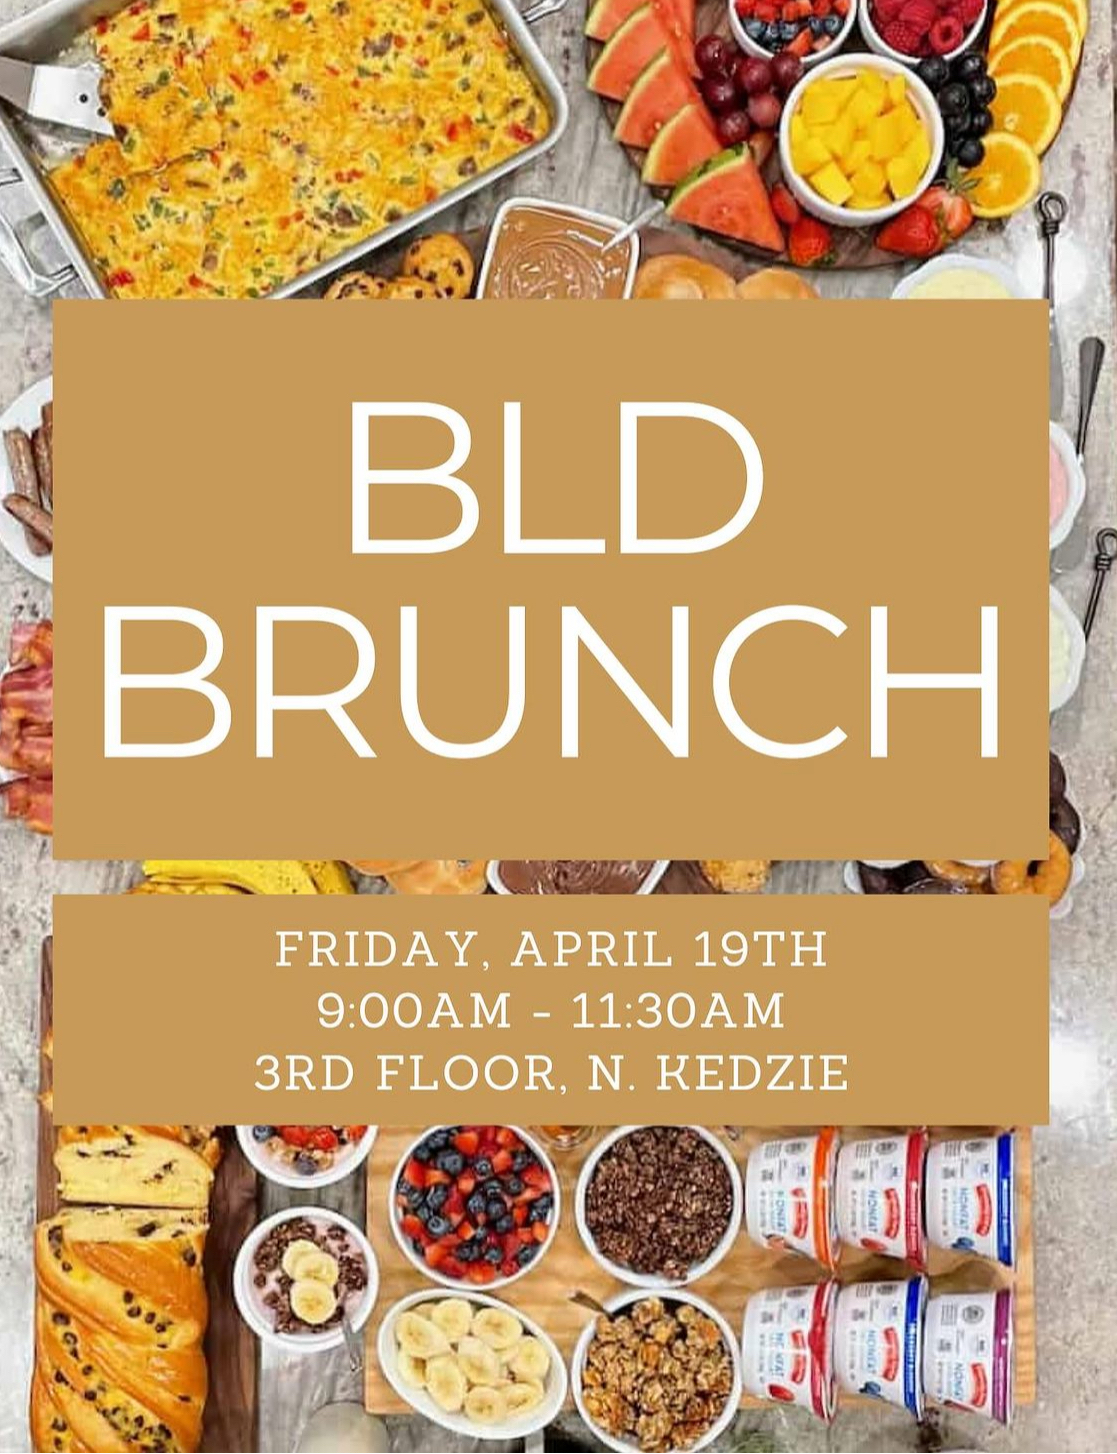 Flyer for brunch with food